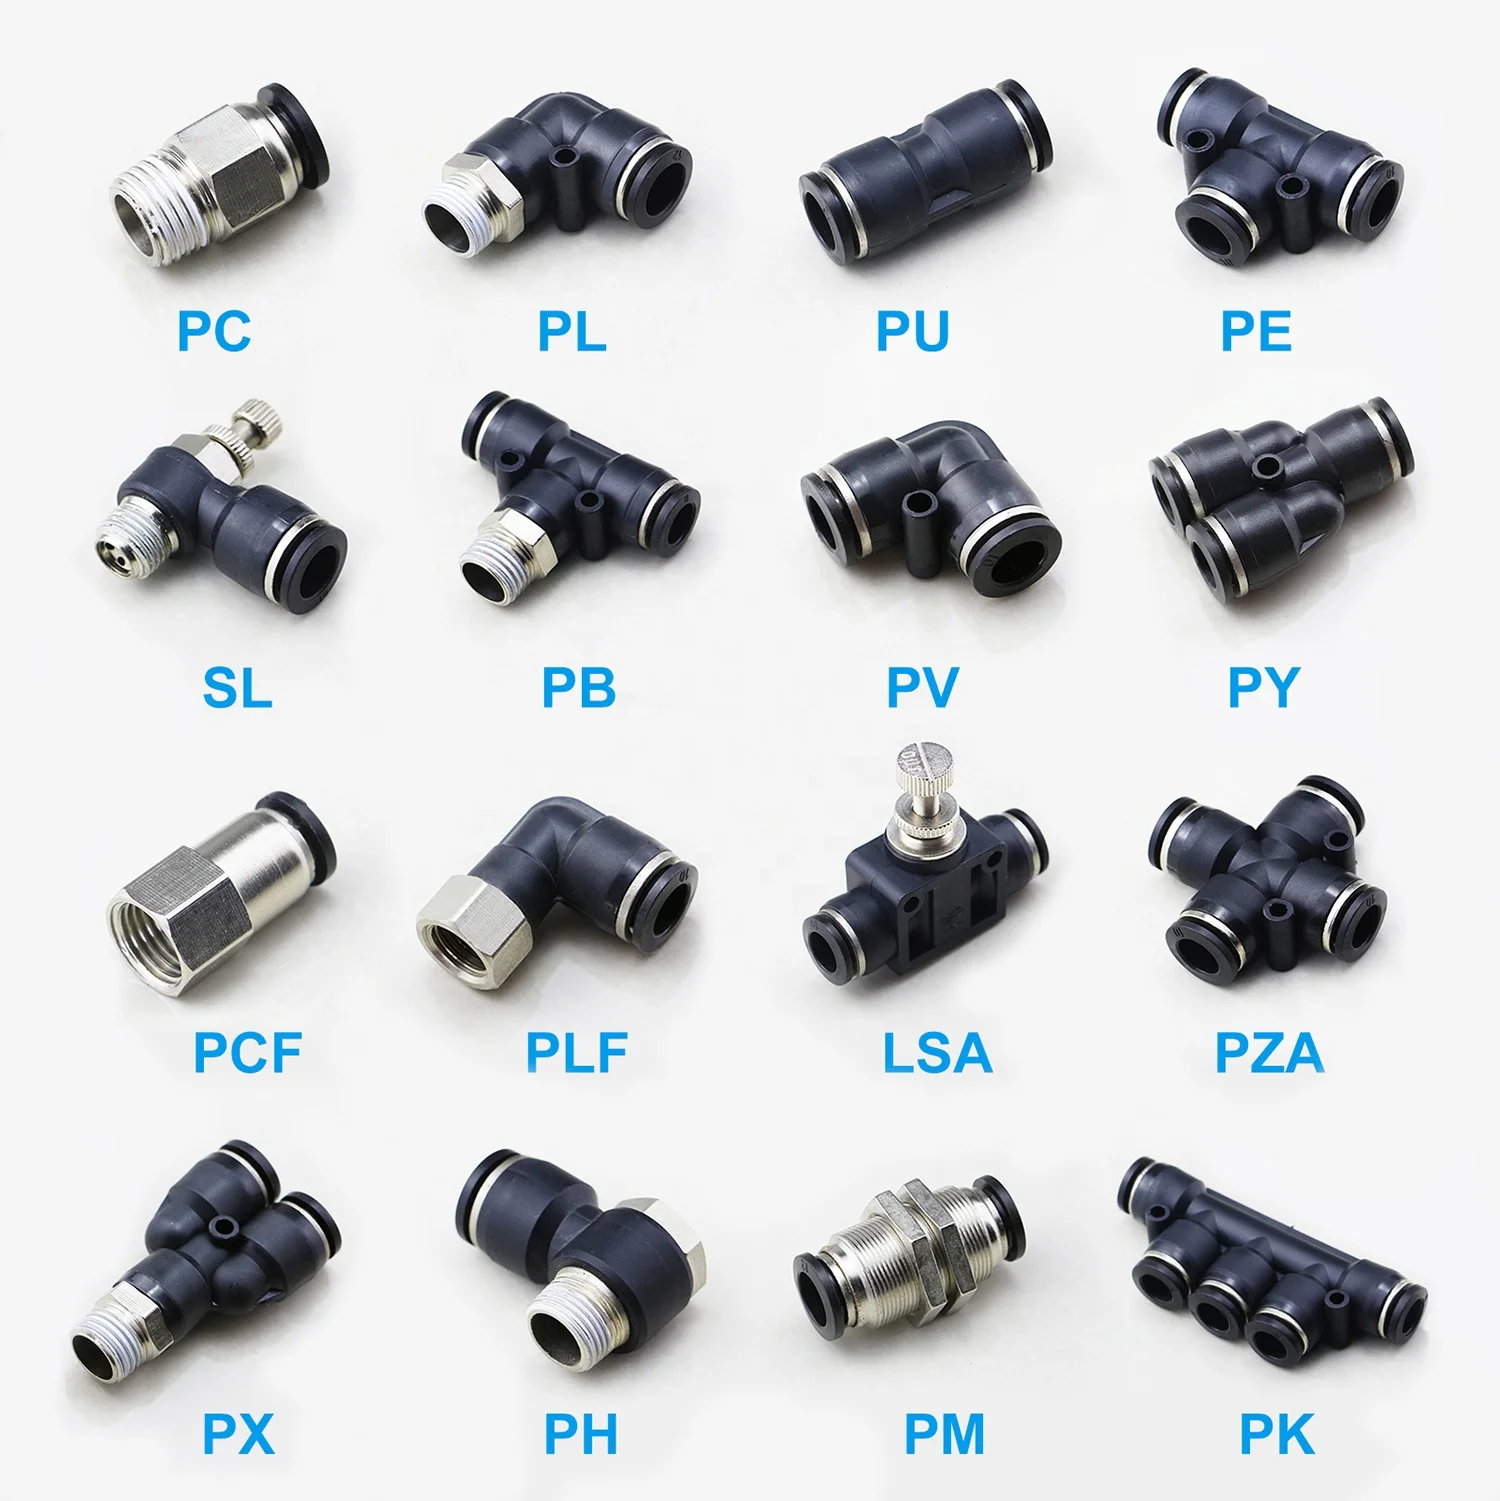 5 Pack PE-05 5/16 Tube OD Union Tee Push to Connect Pneumatic Tube Fitting Composite